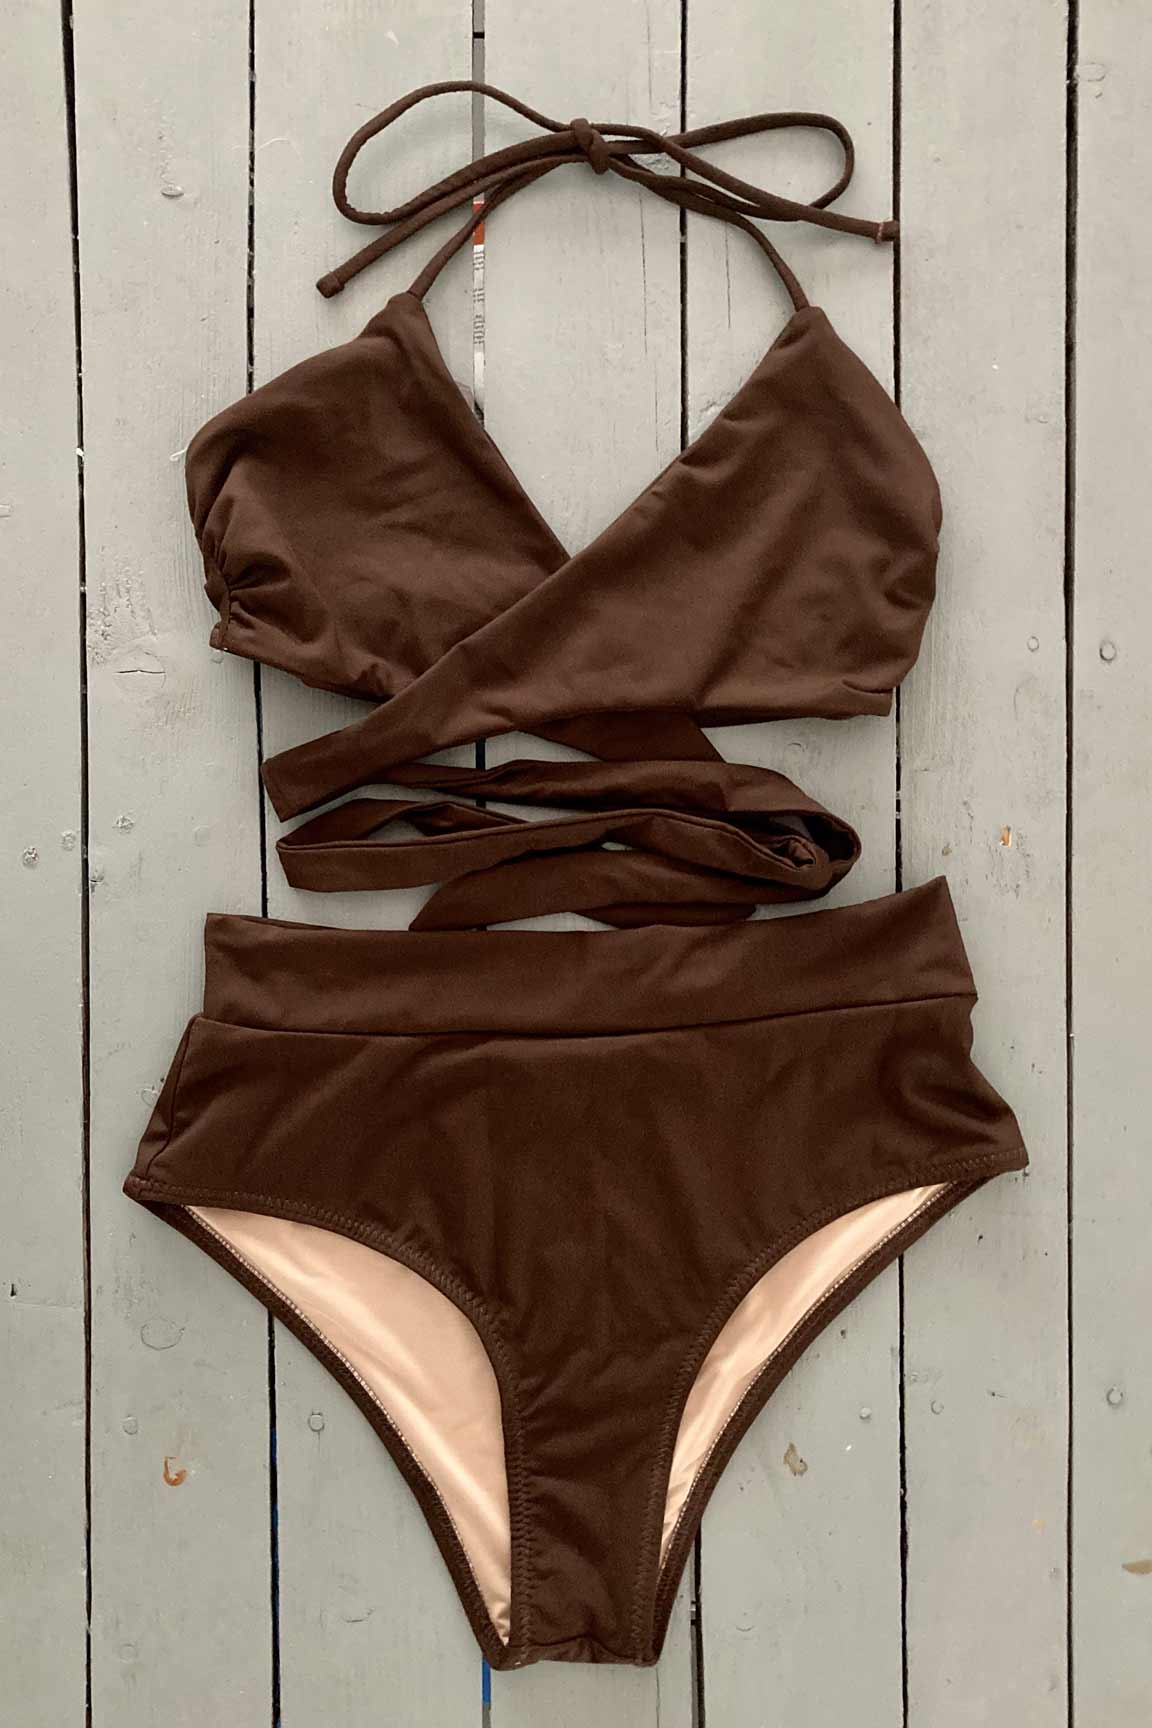 Look good and feel good in one of our high waisted bikini bottoms. These bikini bottoms offer a more modest fit. They are made with the finest quality of soft and stretchy Lycra to achieve the best fit. Order yours today. @jillesbikinis  